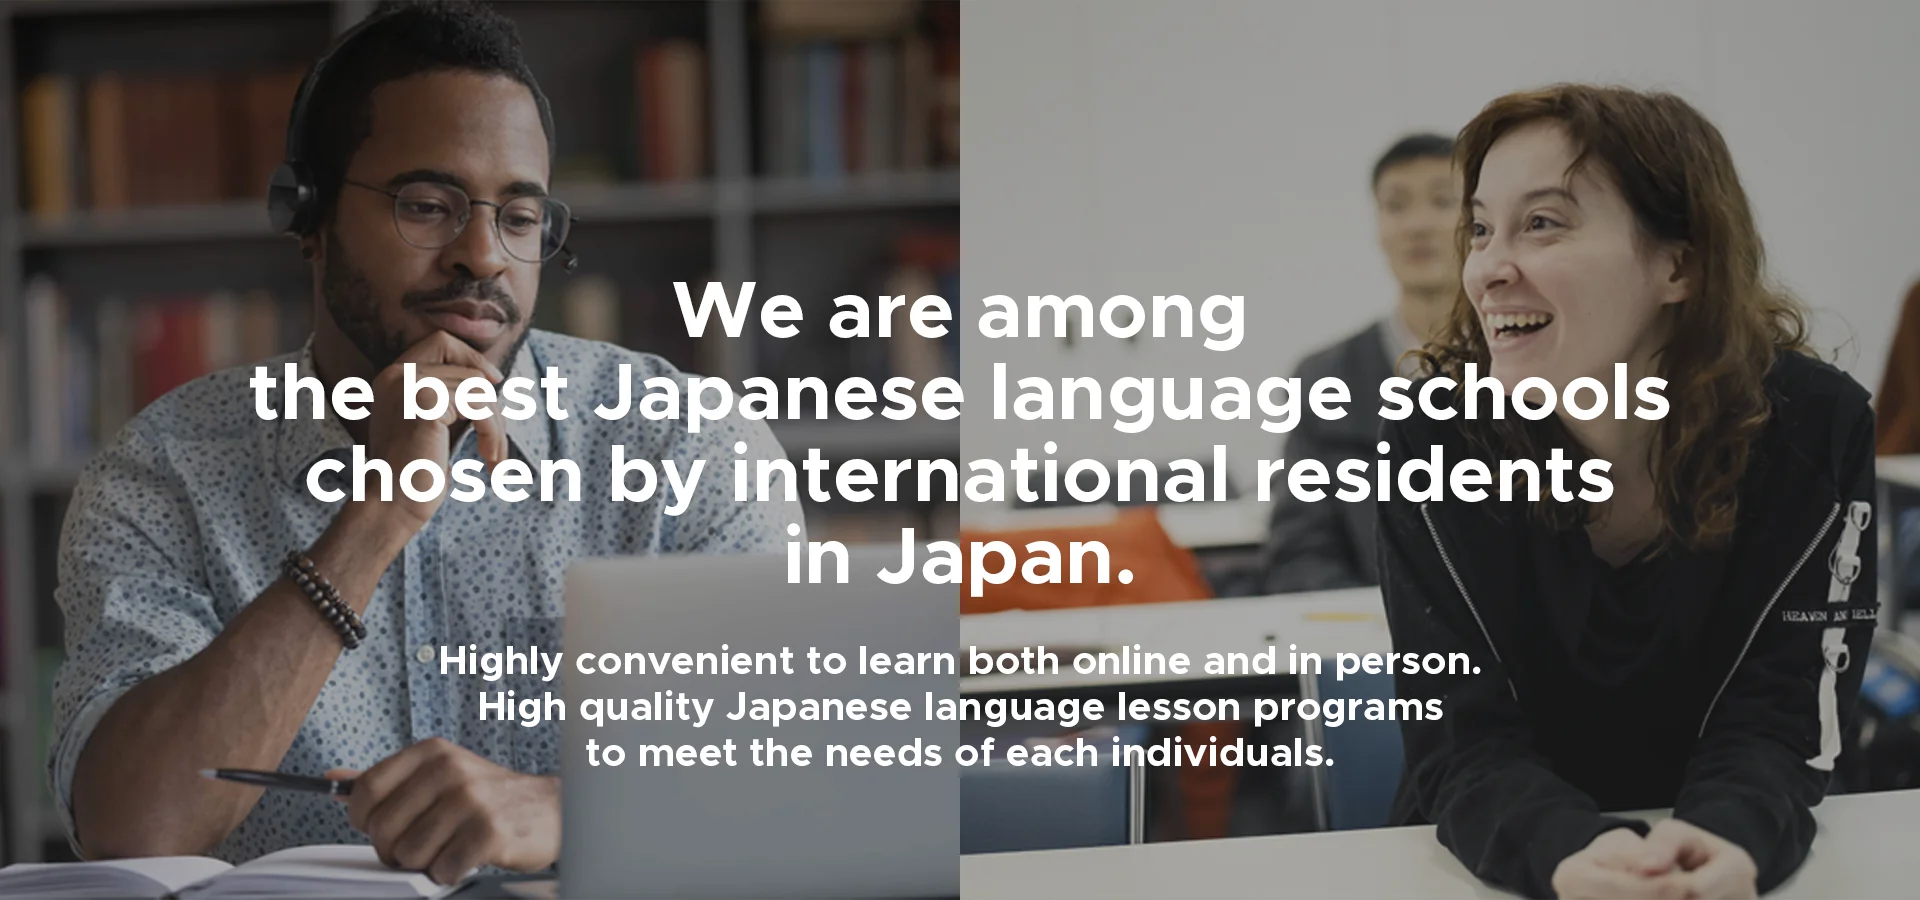 We are among the best Japanese language schools chosen by international residents in Japan.